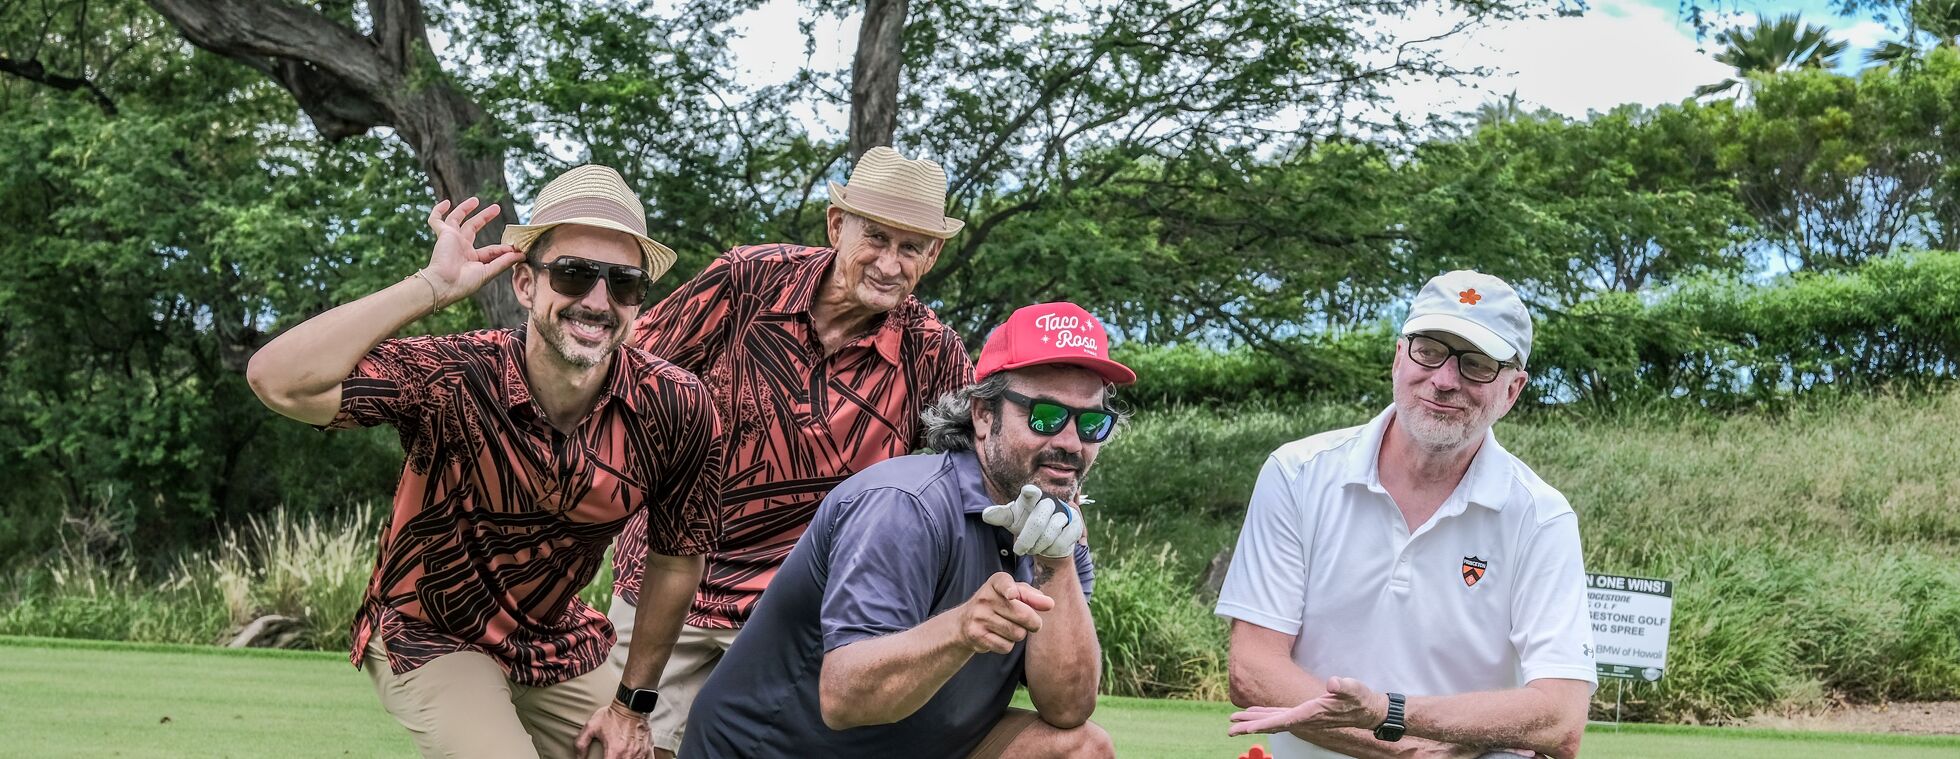 15th Annual Tommy Bahama Golf Classic to Benefit North Hawaii Hospice